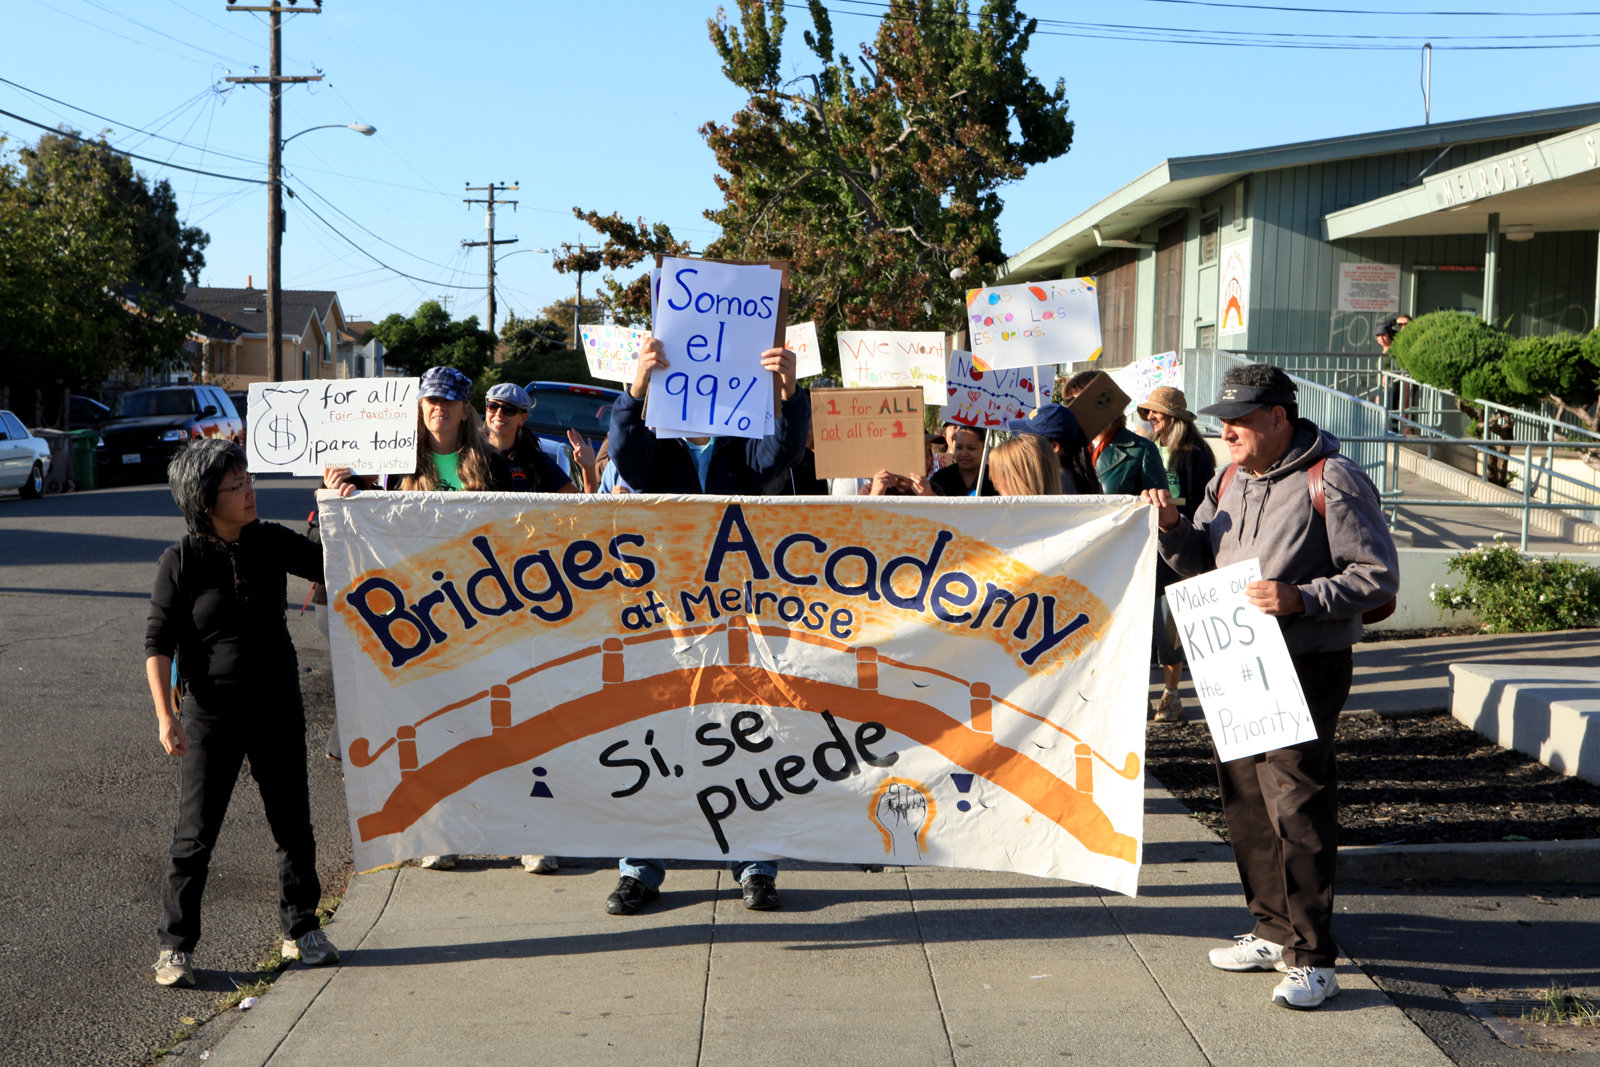 At Bridges Academy, a school's teaching staff marches to support Occupy ...